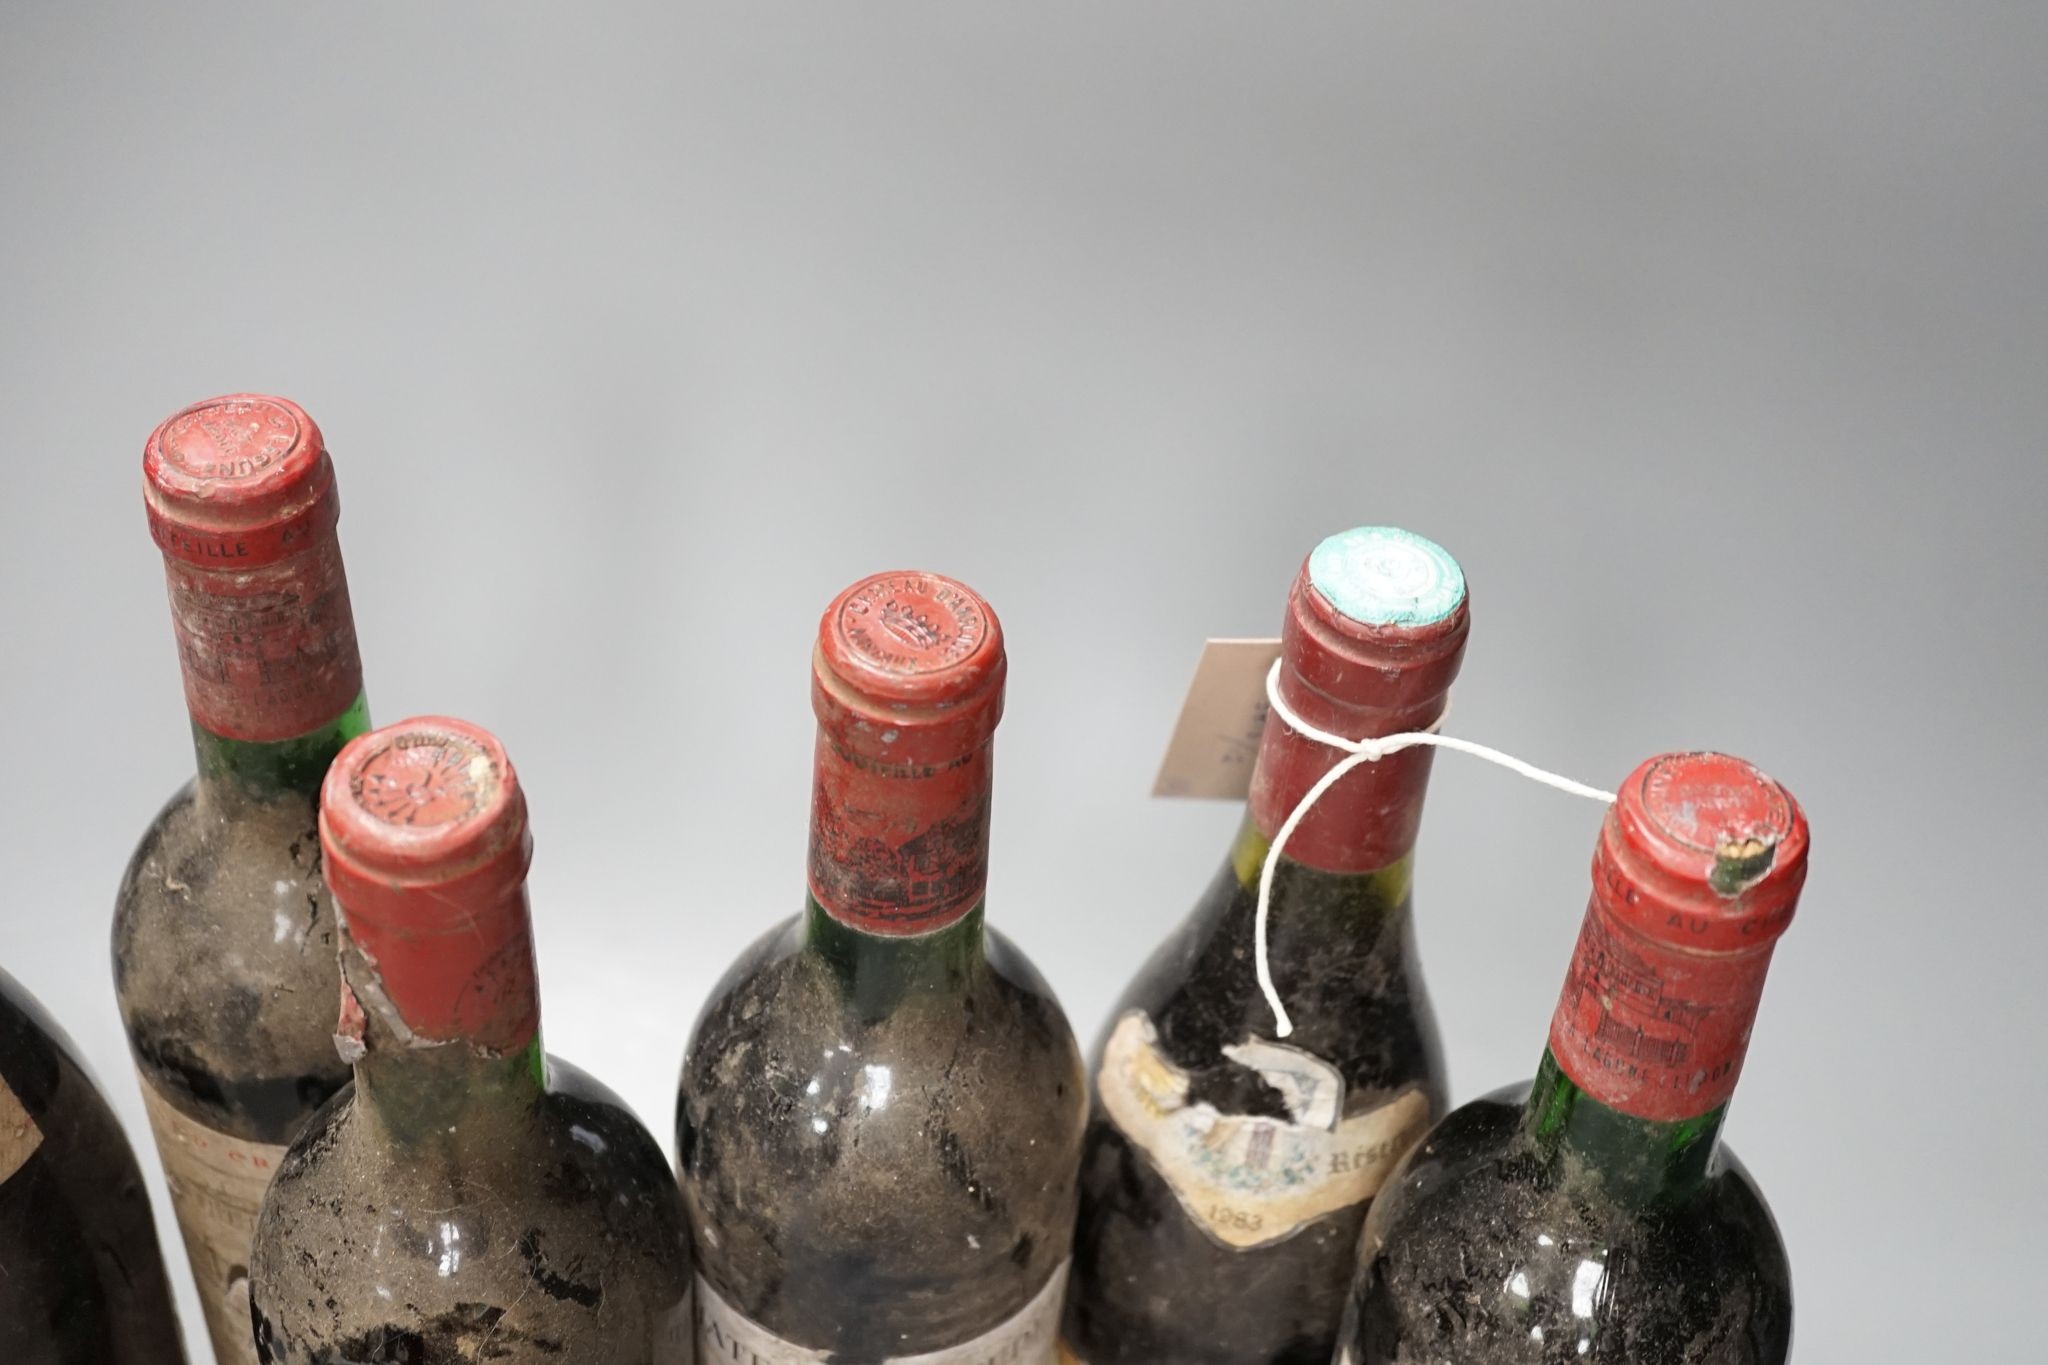 Six various bottles of red wine including two bottles of Château La Lagune 1976 etc.